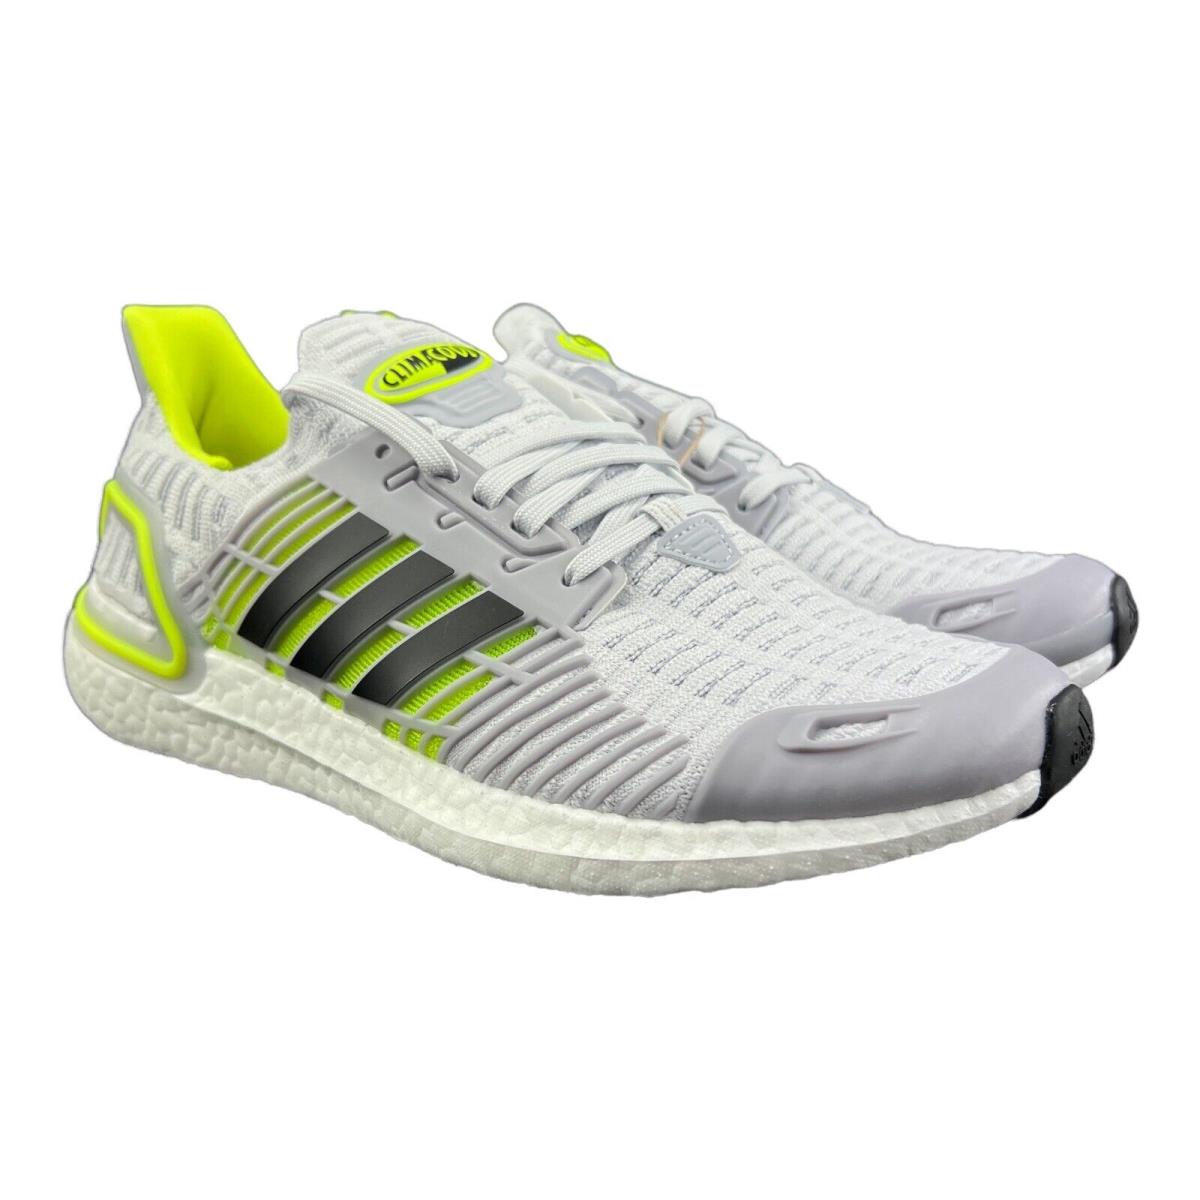 Adidas shoes UltraBoost DNA - Gray 1